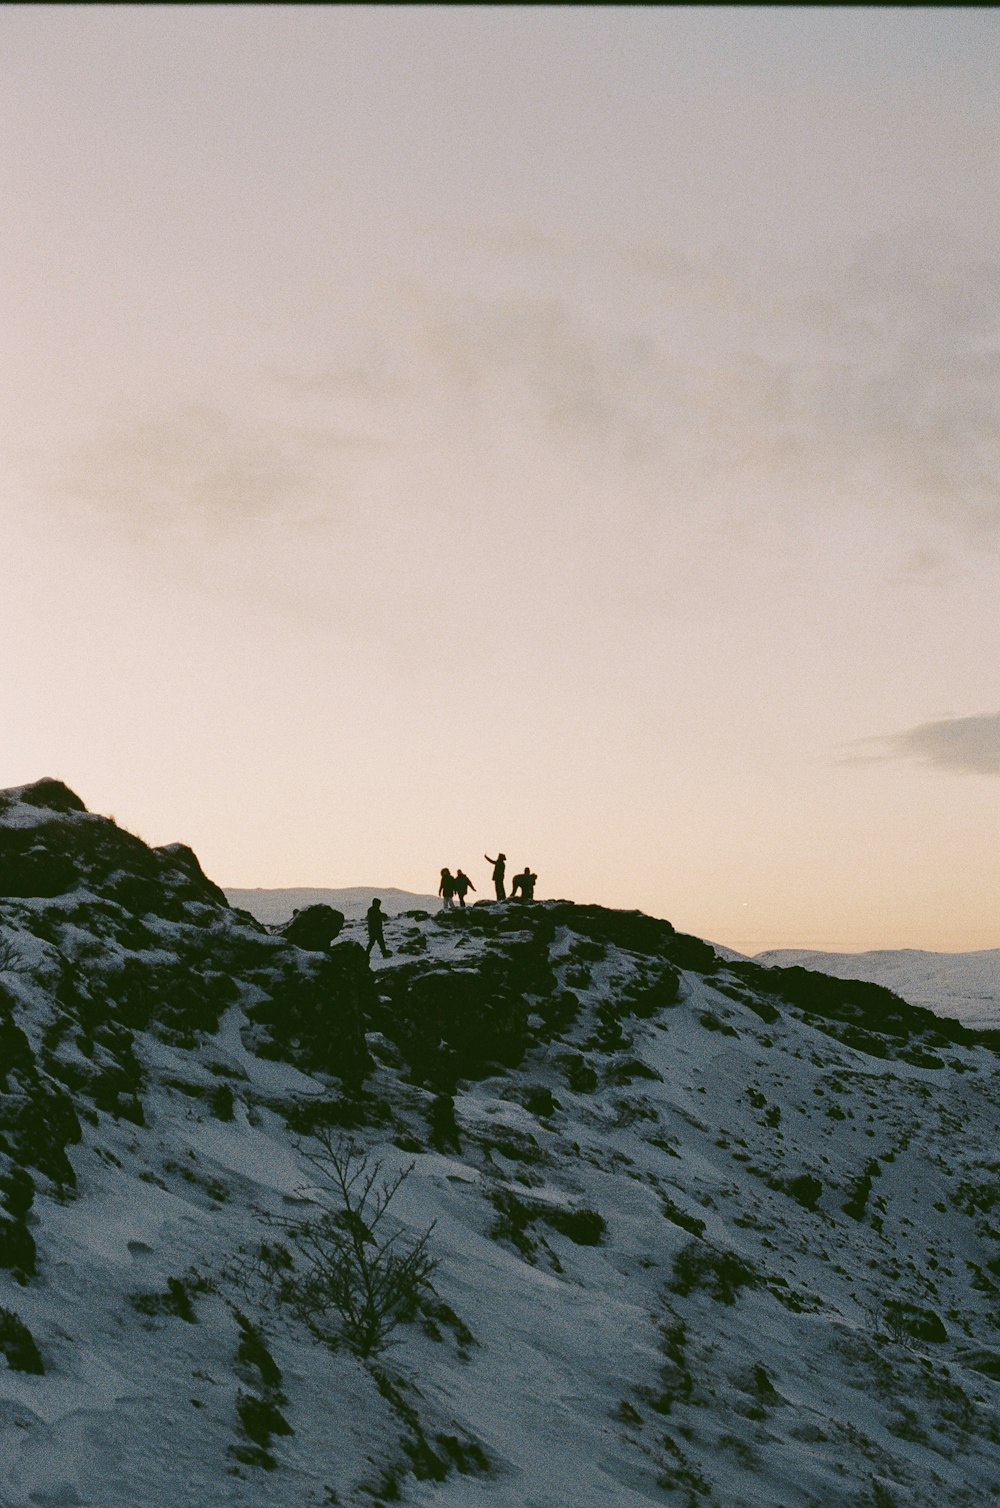 a group of people standing on top of a snow covered hill